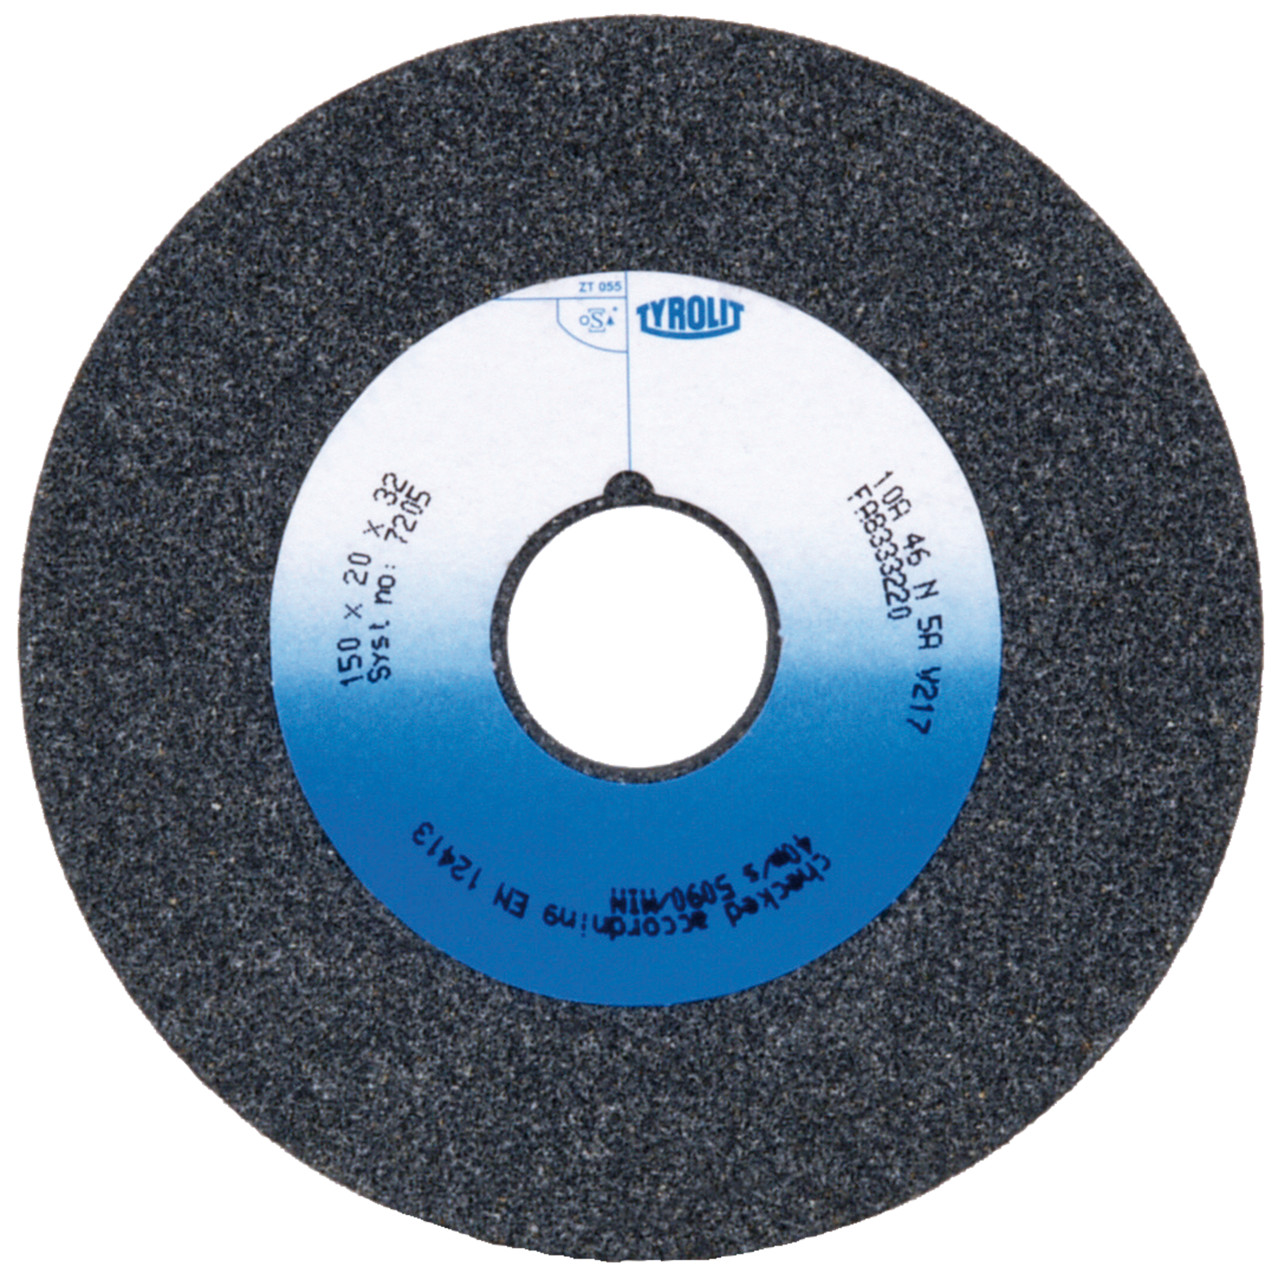 Tyrolit Conventional ceramic grinding discs DxDxH 250x32x51 For unalloyed and low-alloy steels, shape: 1, Art. 147701